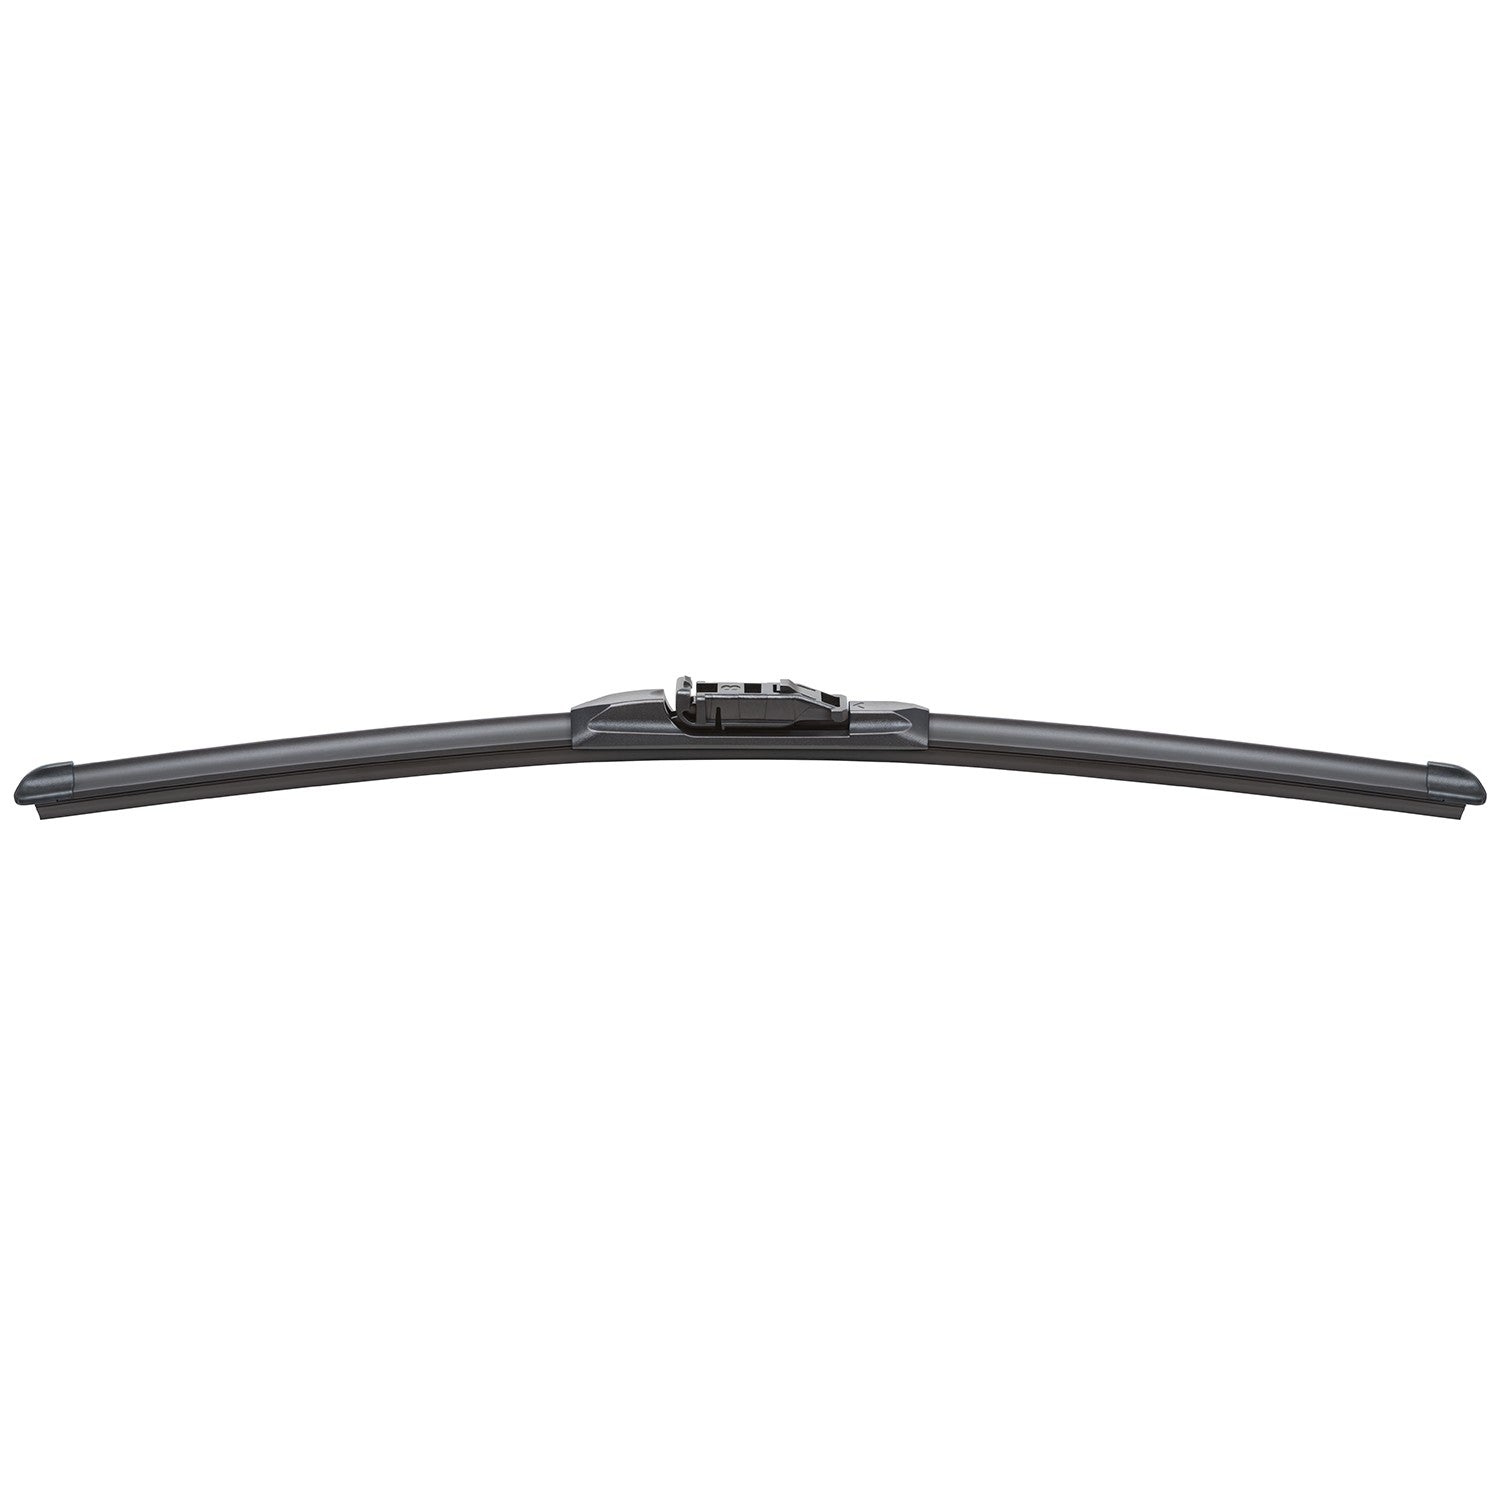 TRICO Exact Fit Windshield Wiper Blade  top view frsport 17-15B